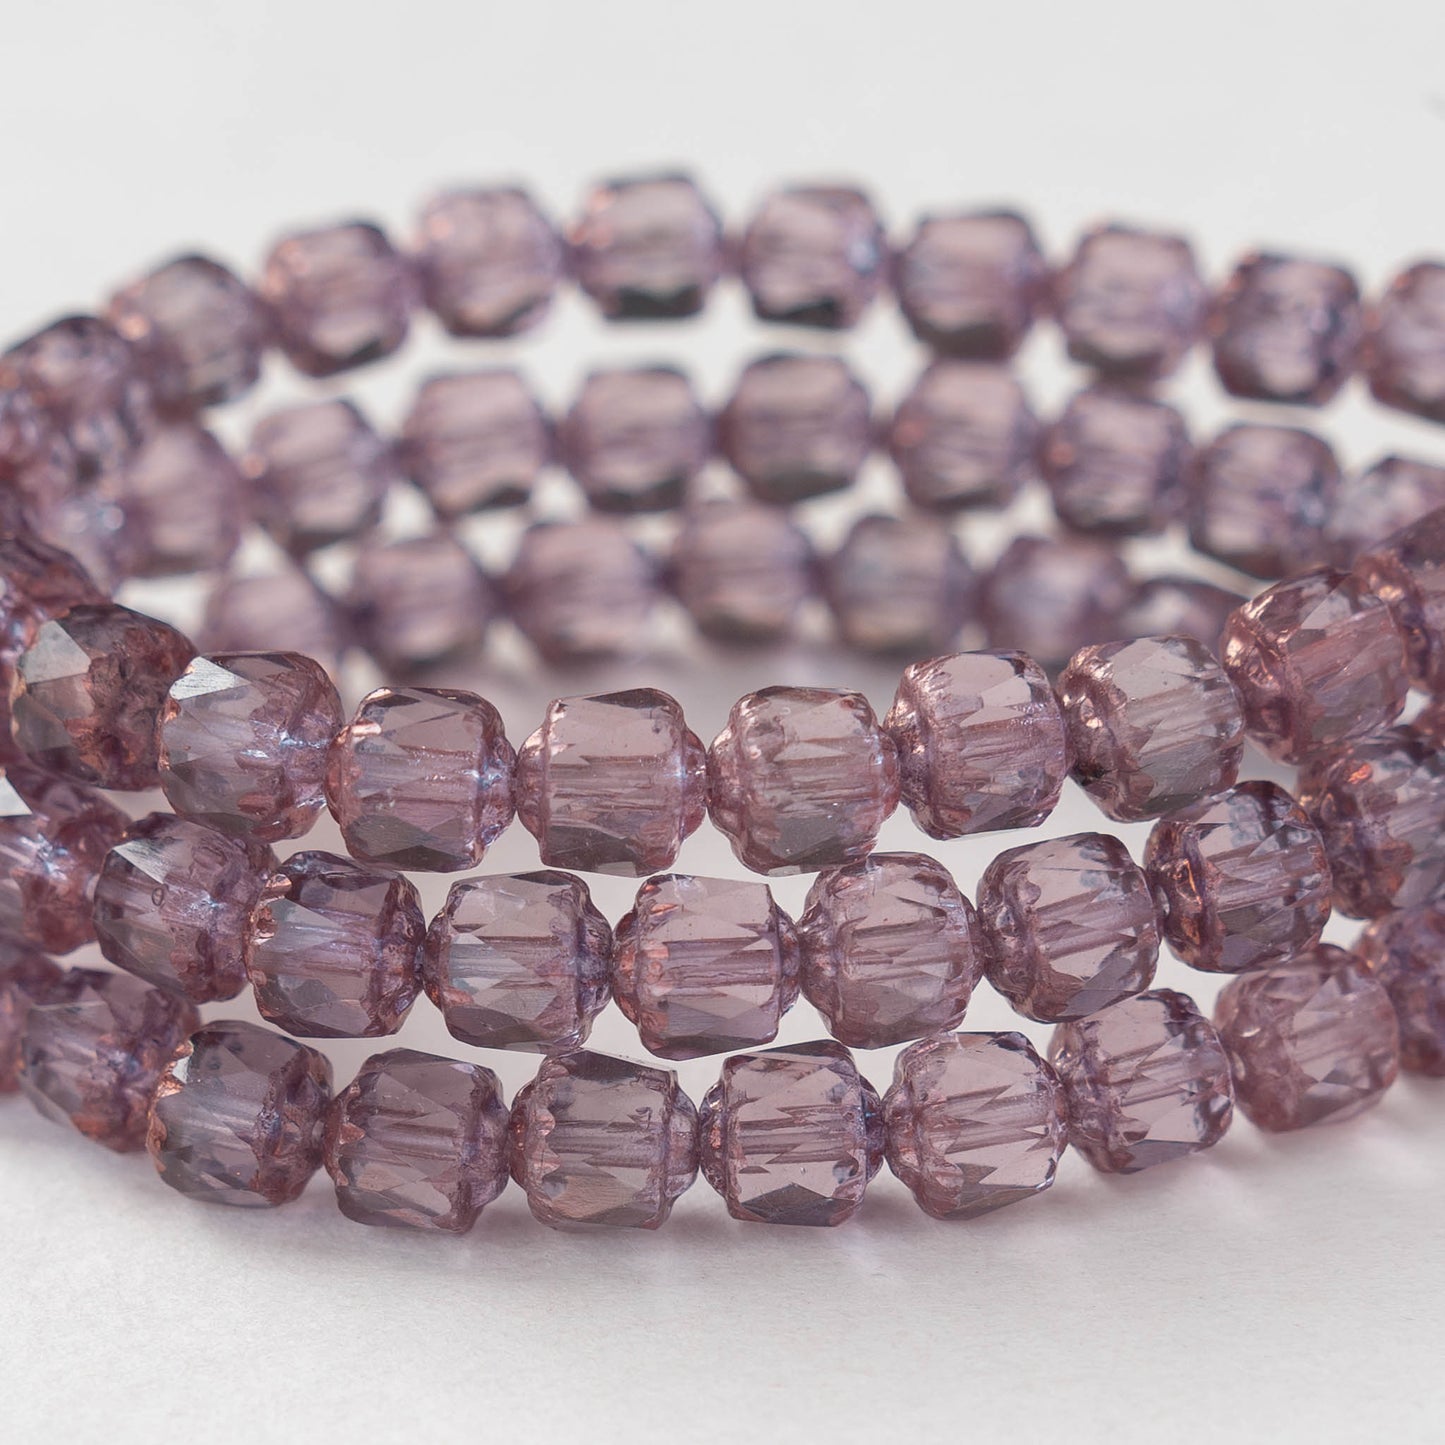 6mm Cathedral Tube - Light Amethyst with Bronze - 25 Beads